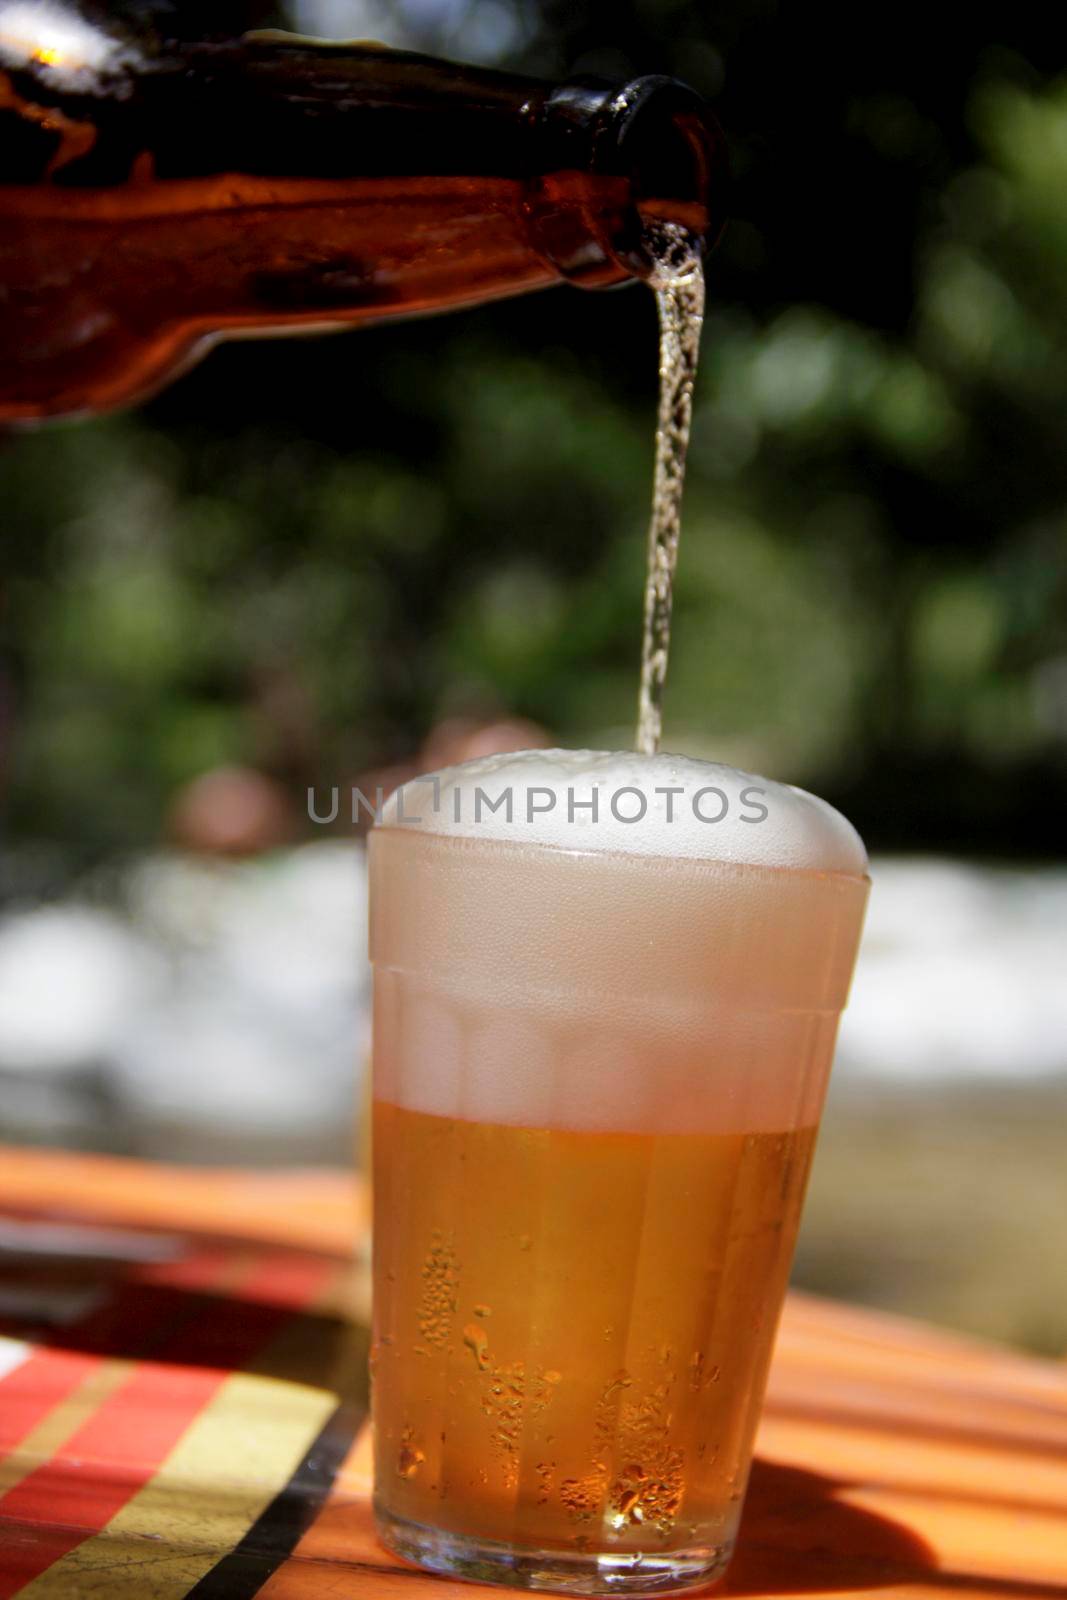 salvador, bahia / brazil - december 20, 2014: bottle of beer spilling on the com on a bar table in the city of Salvador.

